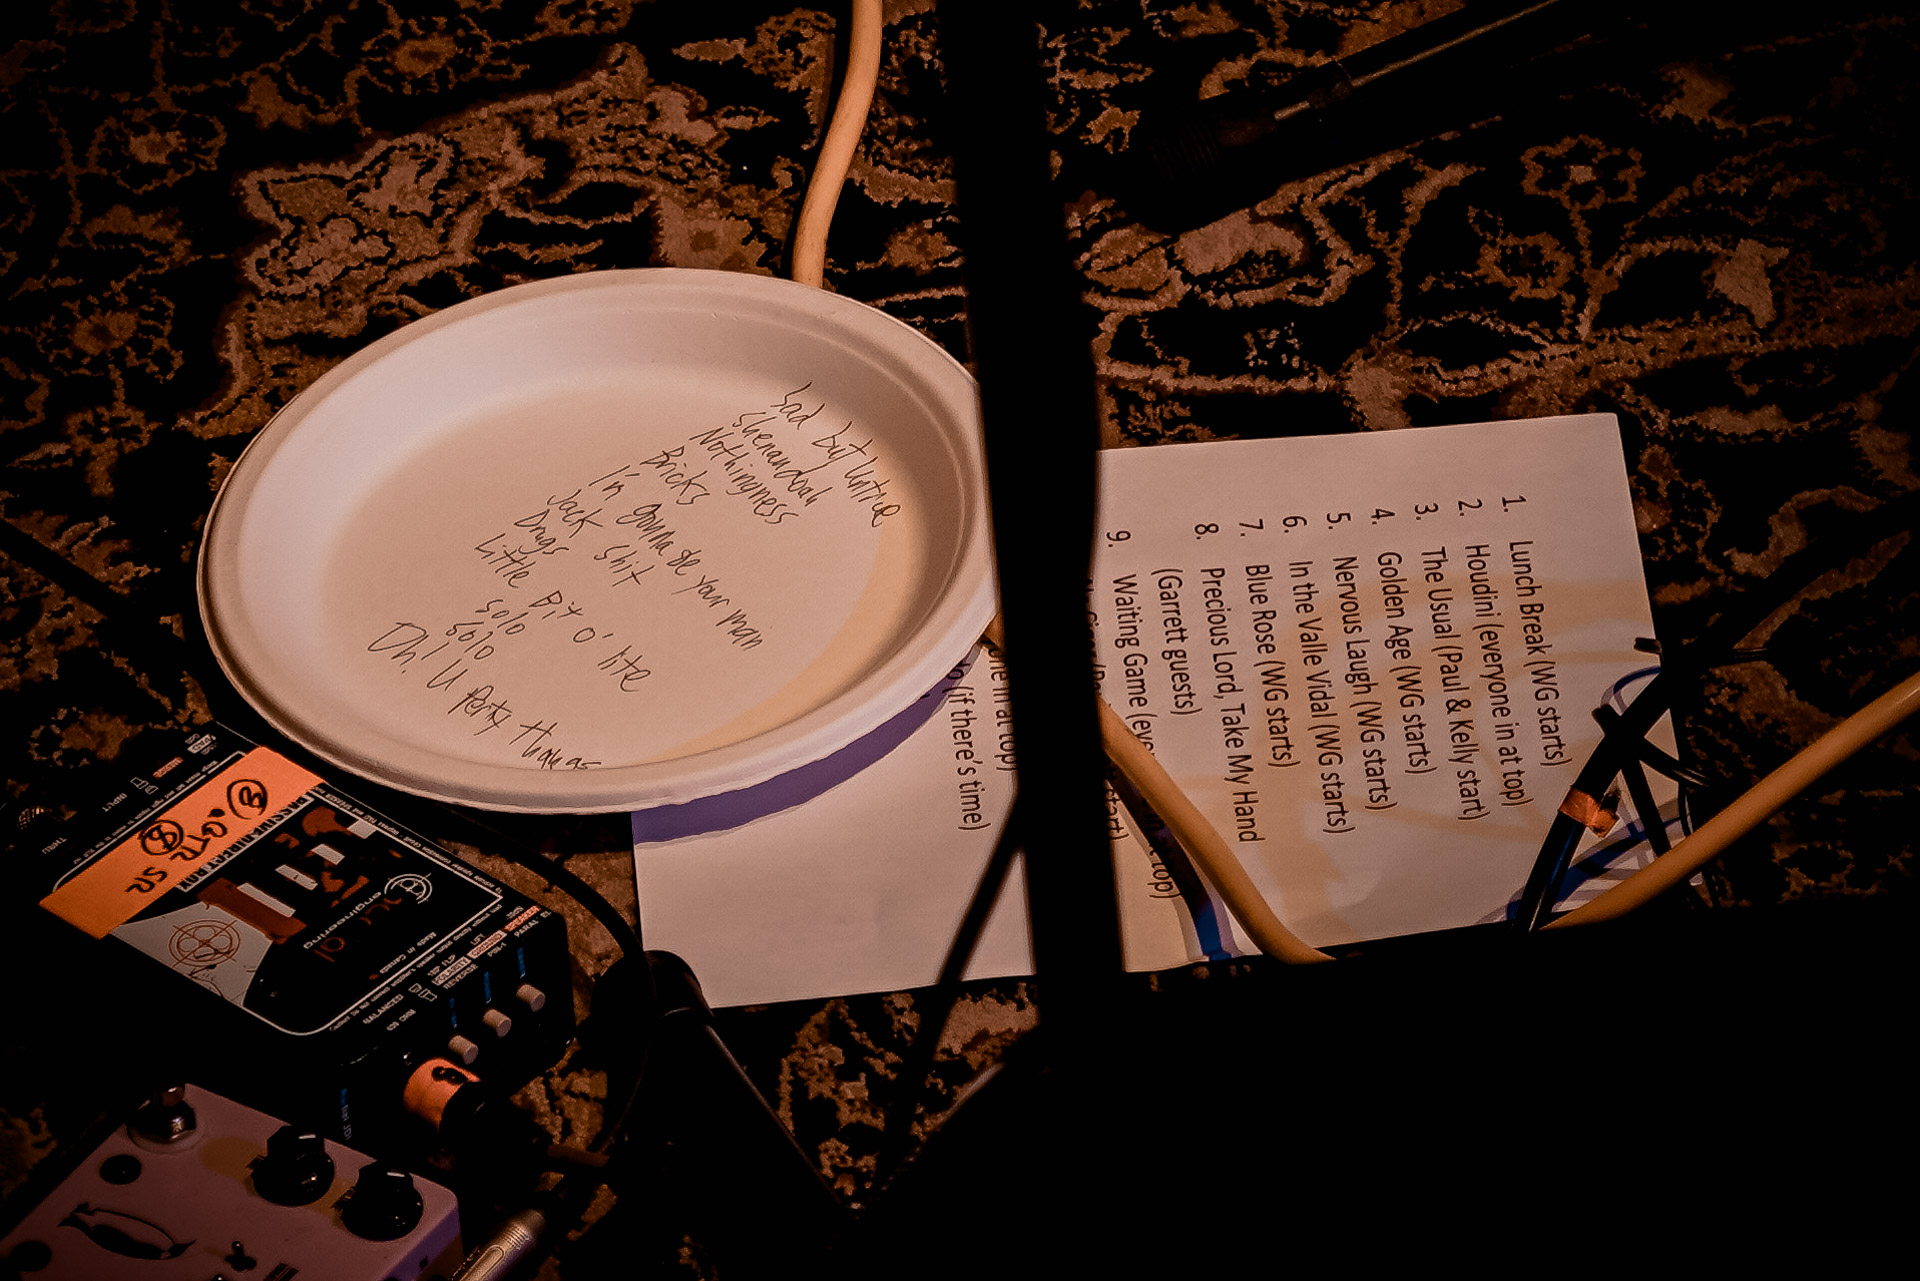 Set lists on stage, one written on a paper plate, one typed on a piece of paper